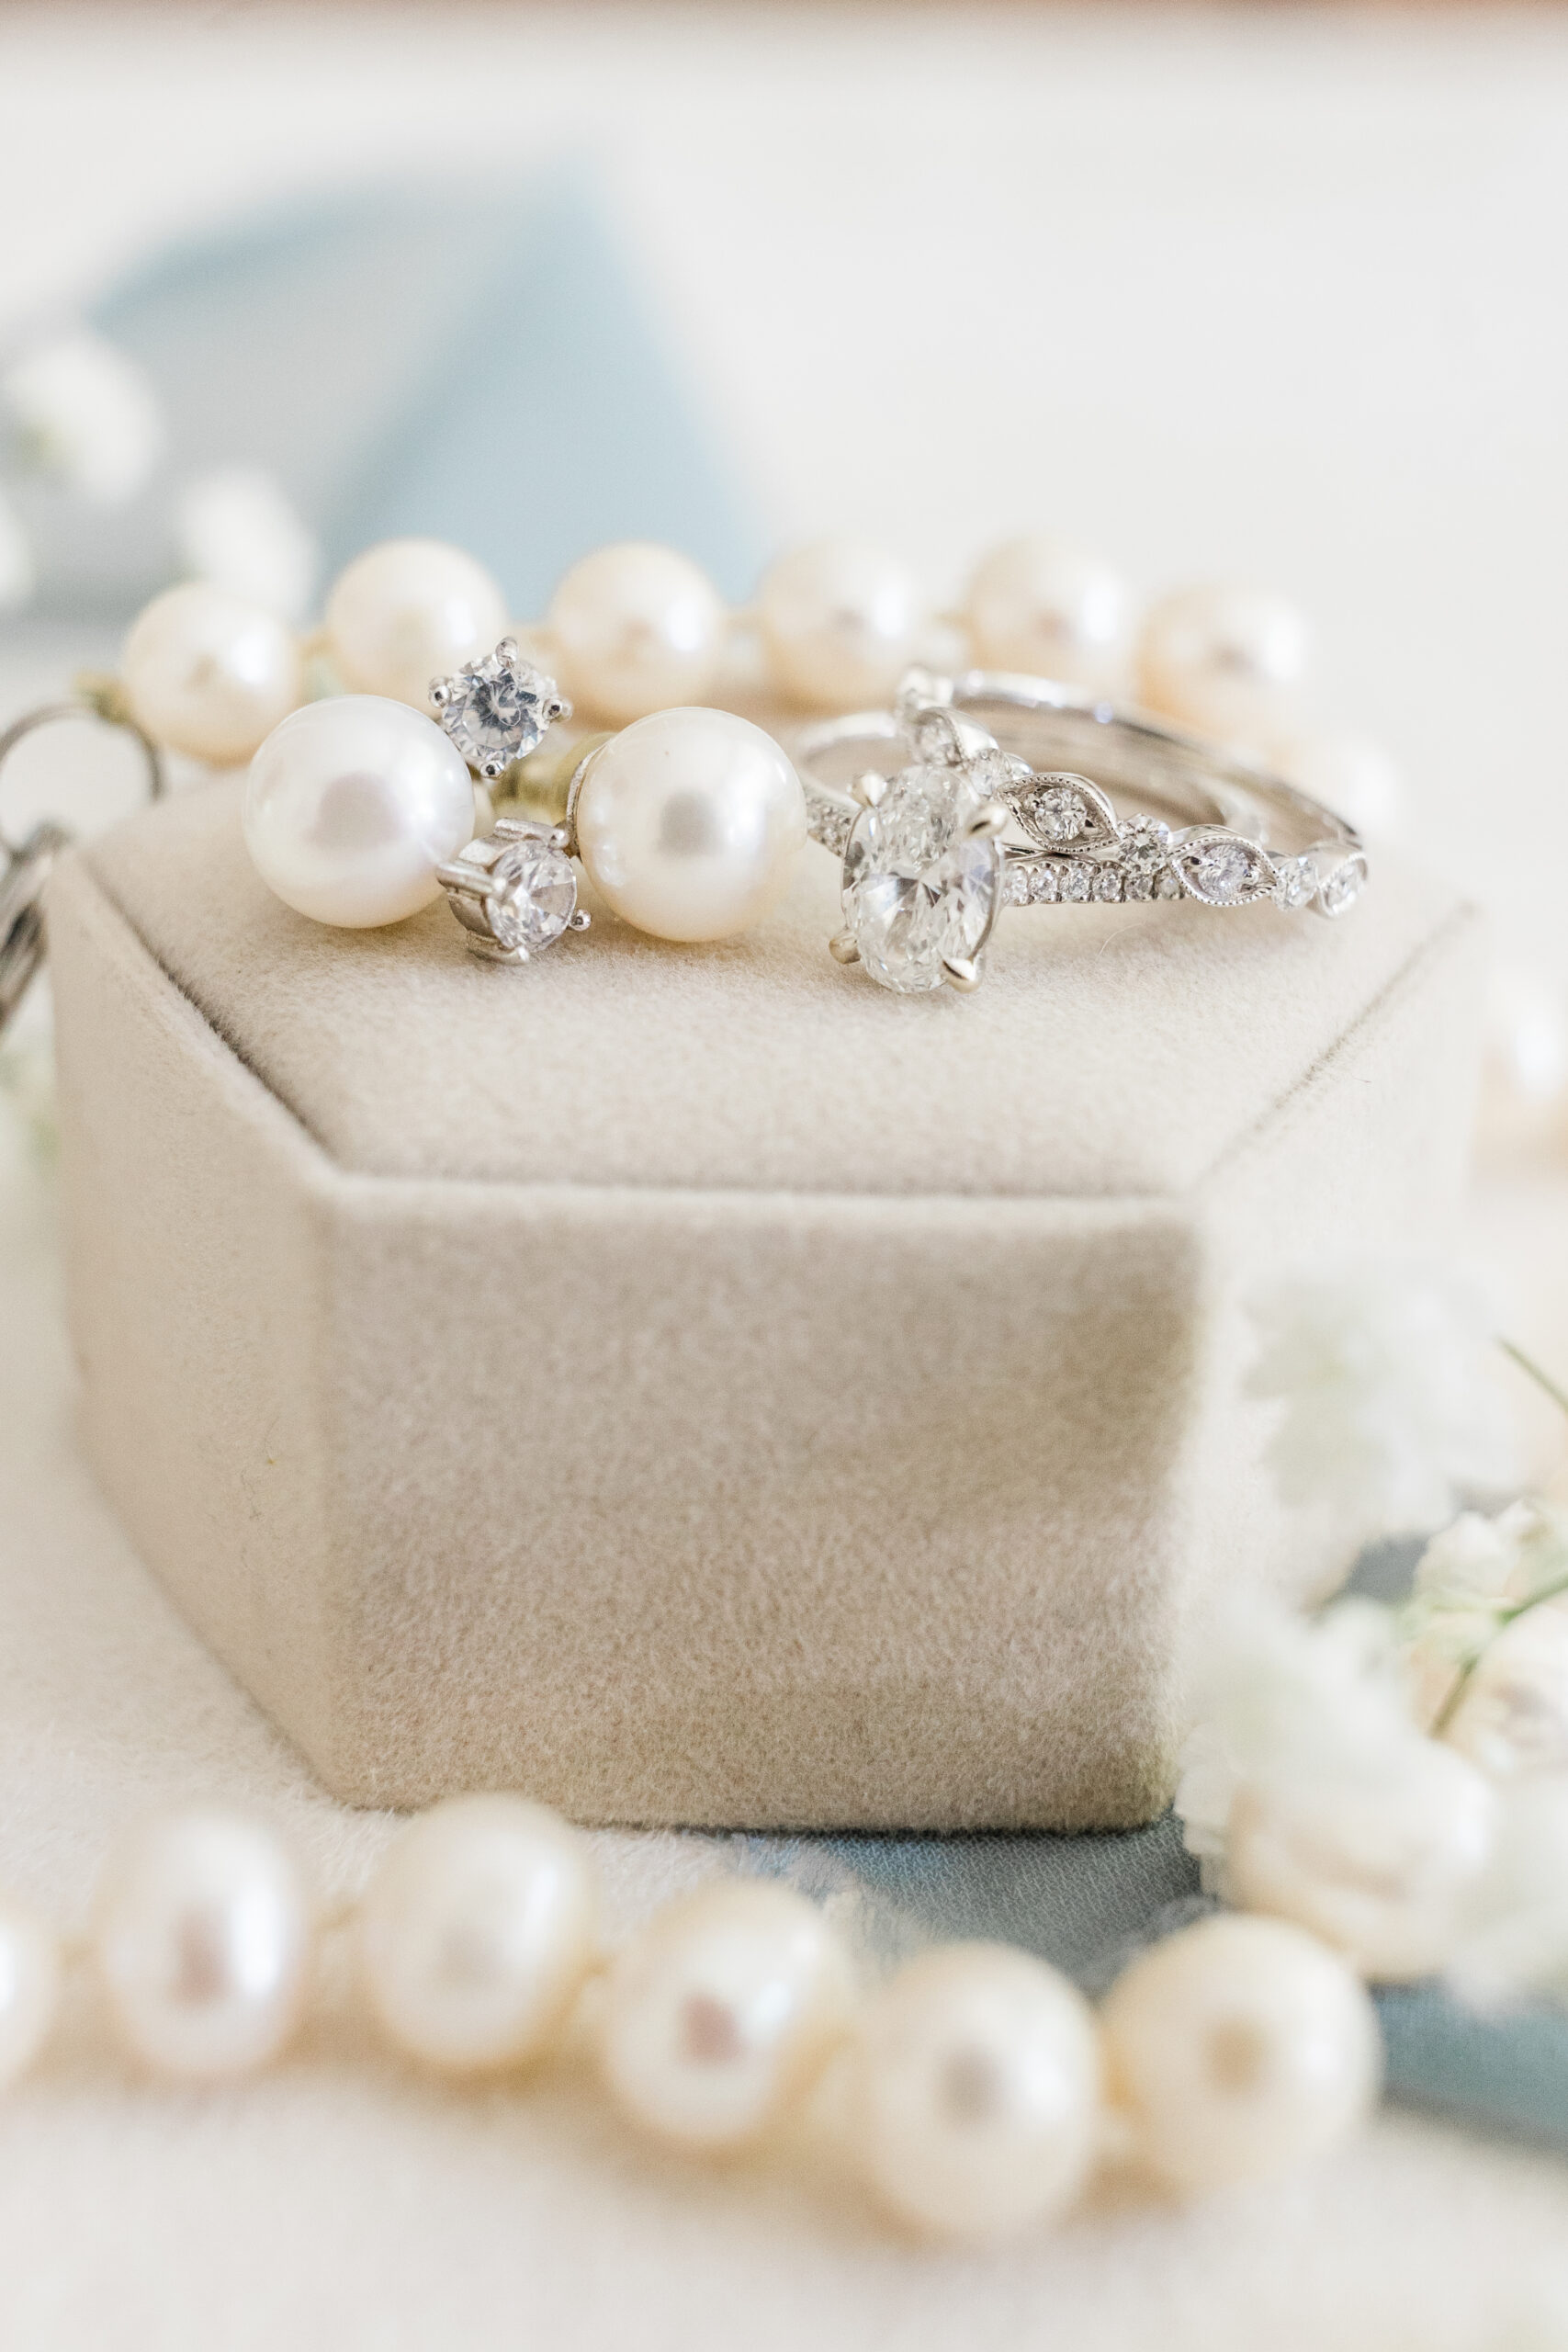 A box of pearls and a wedding ring on a table.